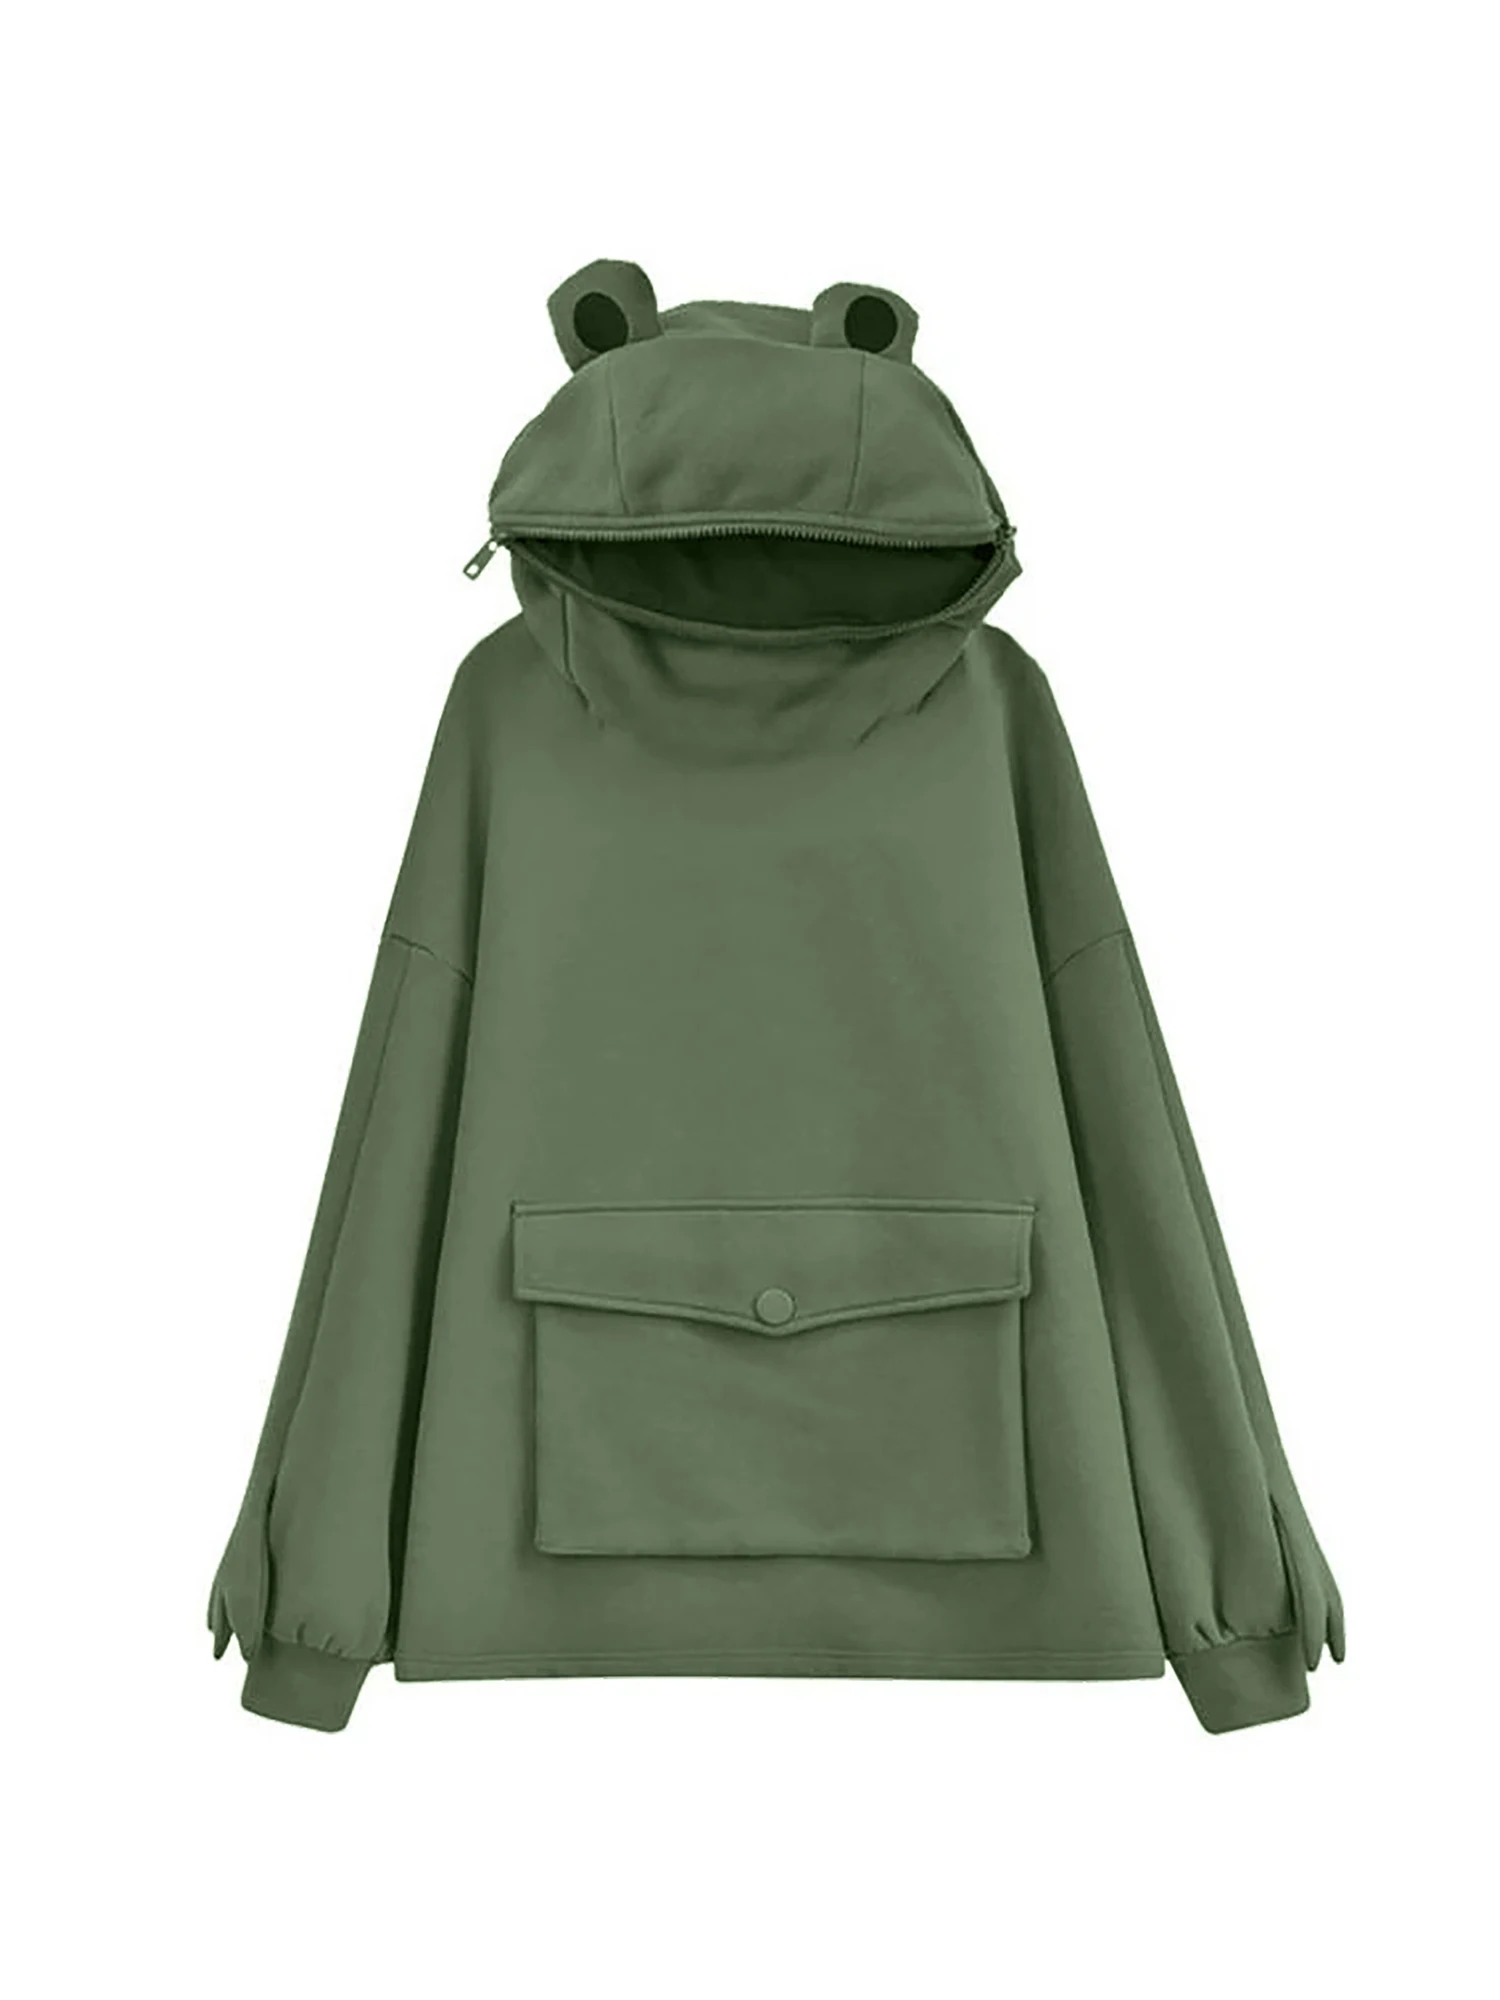 Autumn Winter Frog Hoodie for Women Sweatshirt Solid Color Hooded with Flap Pocket Casual Fashion Lazy Style Coat Loose Top